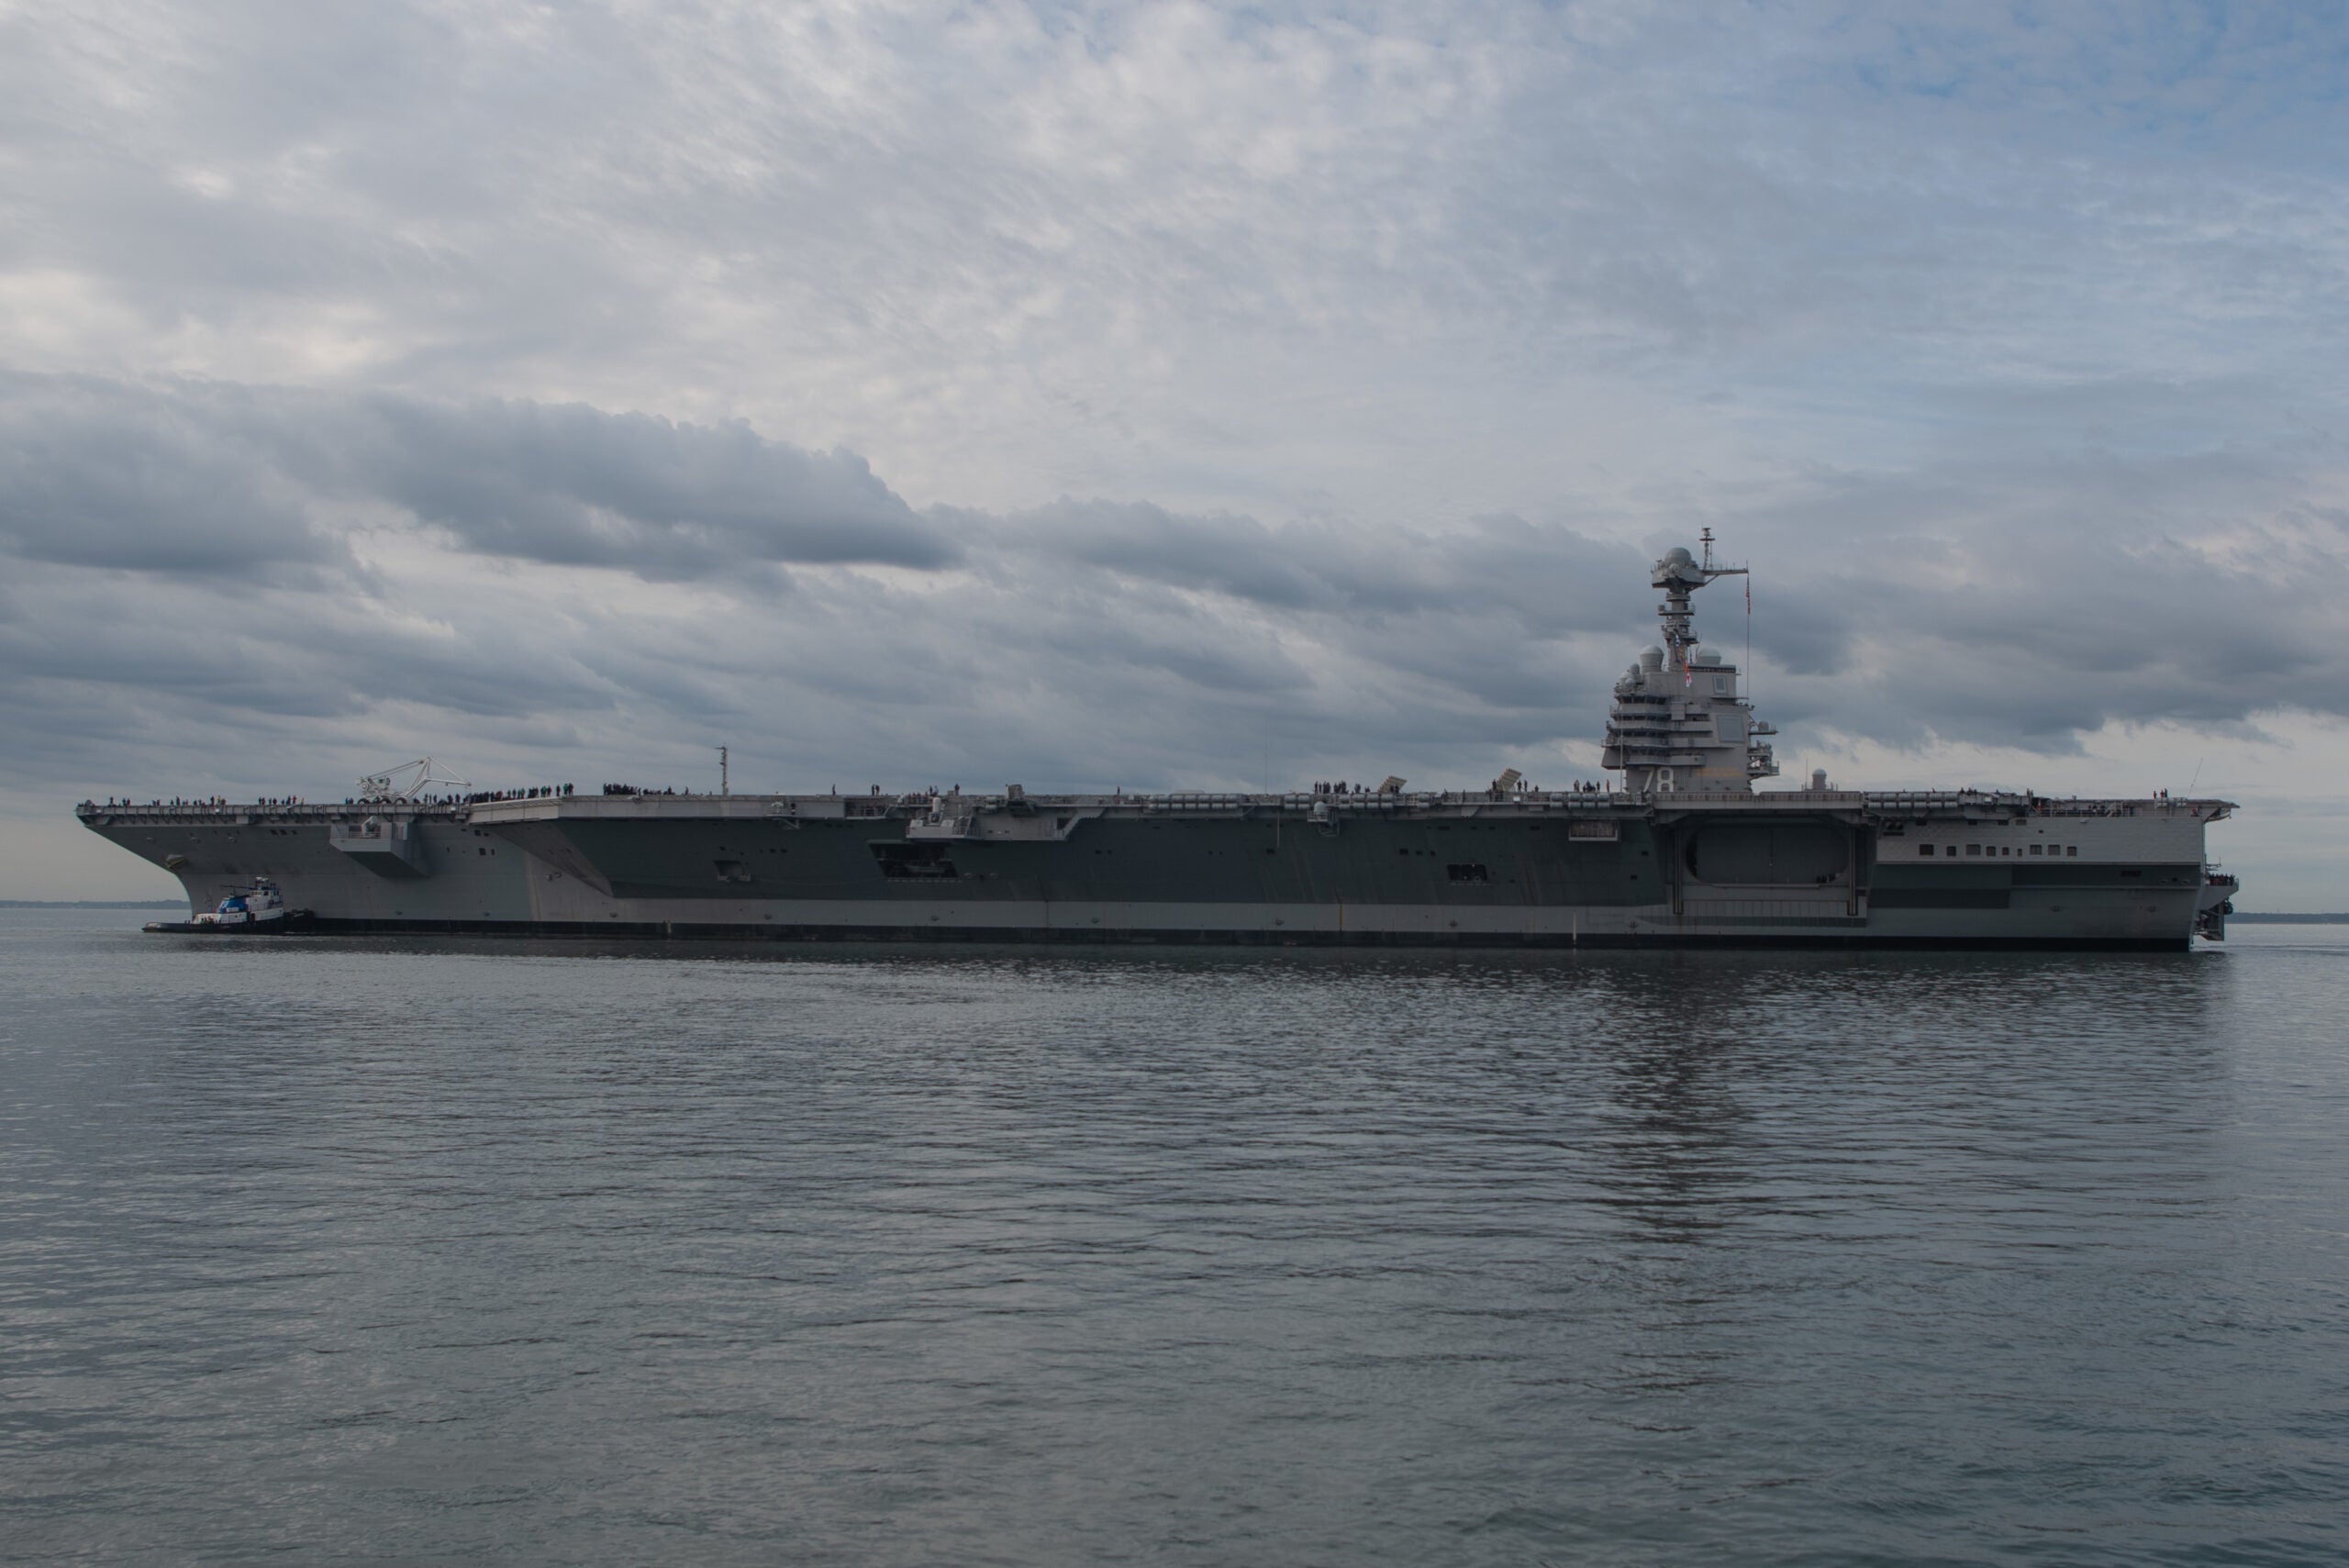 191025-N-ZI768-1133

NEWPORT NEWS, Va. (Oct. 25, 2019) The Ford-class aircraft carrier USS Gerald R. Ford (CVN 78) turns out to sea. Ford departed Huntington Ingalls Industries-Newport News Shipbuilding and returned to sea for the first time since beginning its post-shakedown availability in July 2018 to conduct sea trials. (U.S. Navy photo by Mass Communication Specialist Seaman Cory J. Daut)